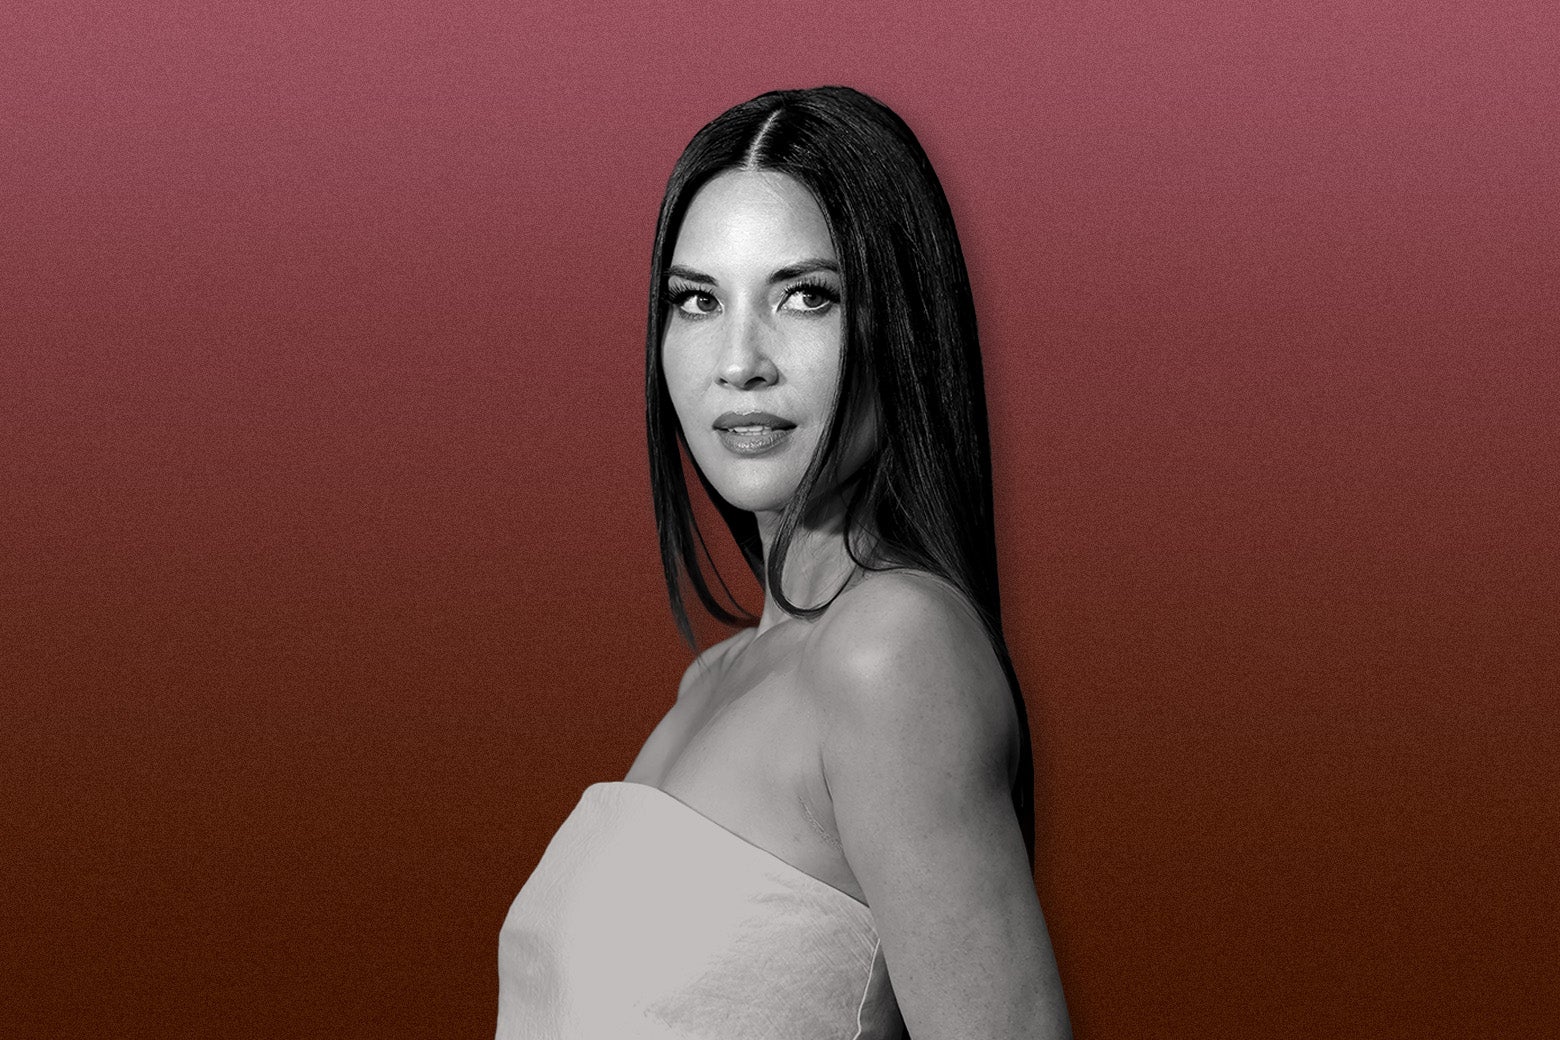 Cancer Screening Saved Olivia Munn’s Life. Other Times, It Causes Fear.